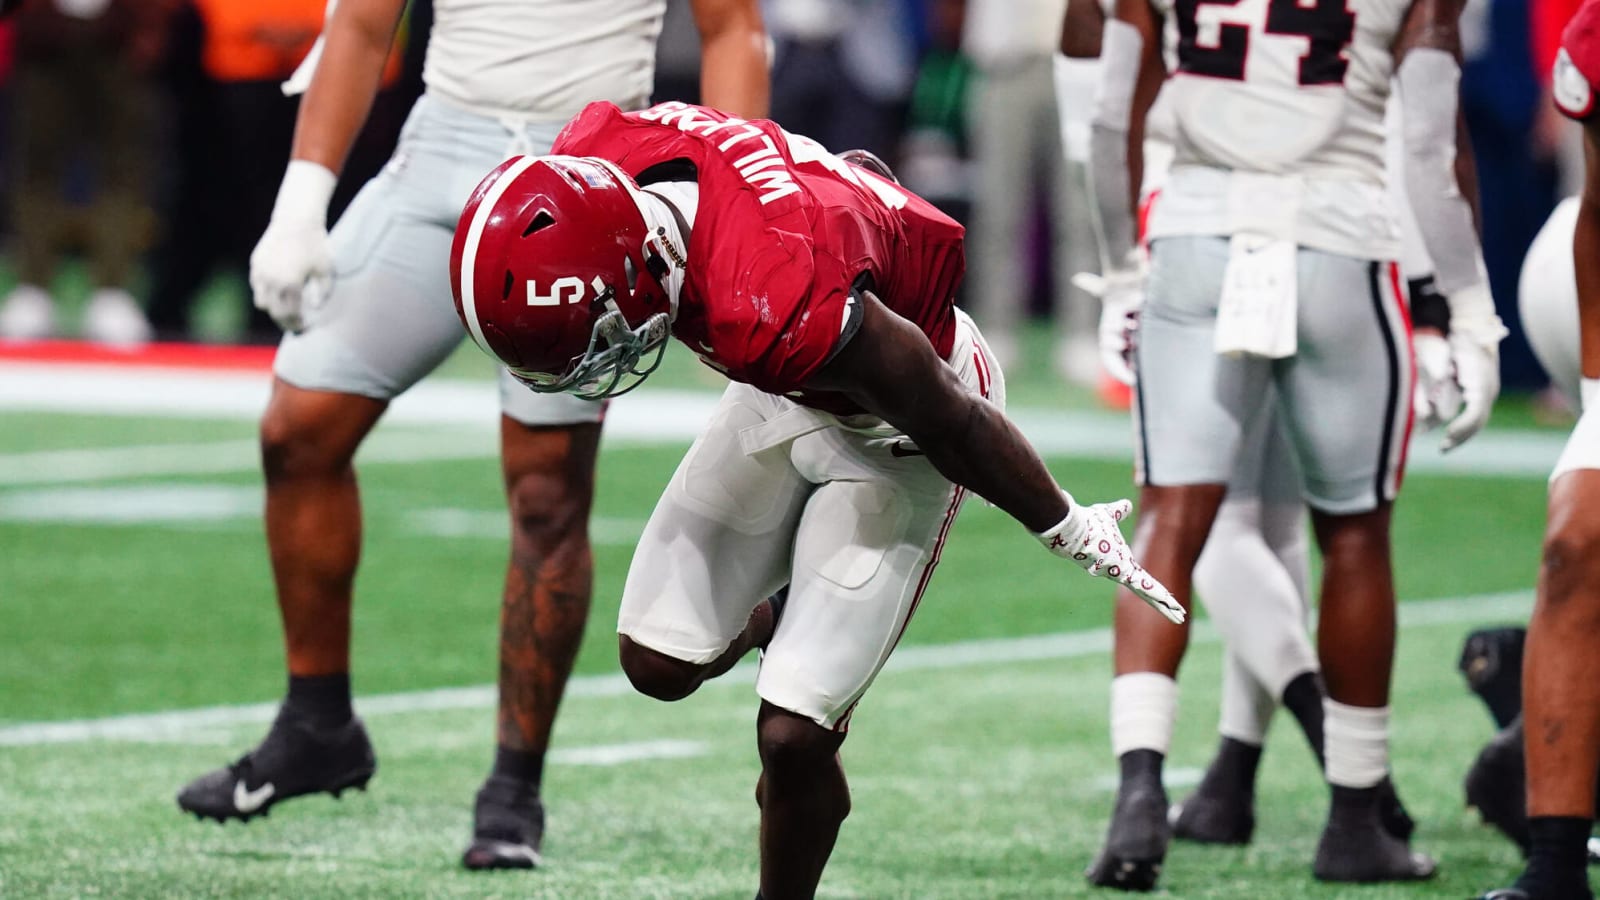  Alabama Football Offensive Playmaker Darts for Transfer Portal; Scored 6 Touchdowns This Season